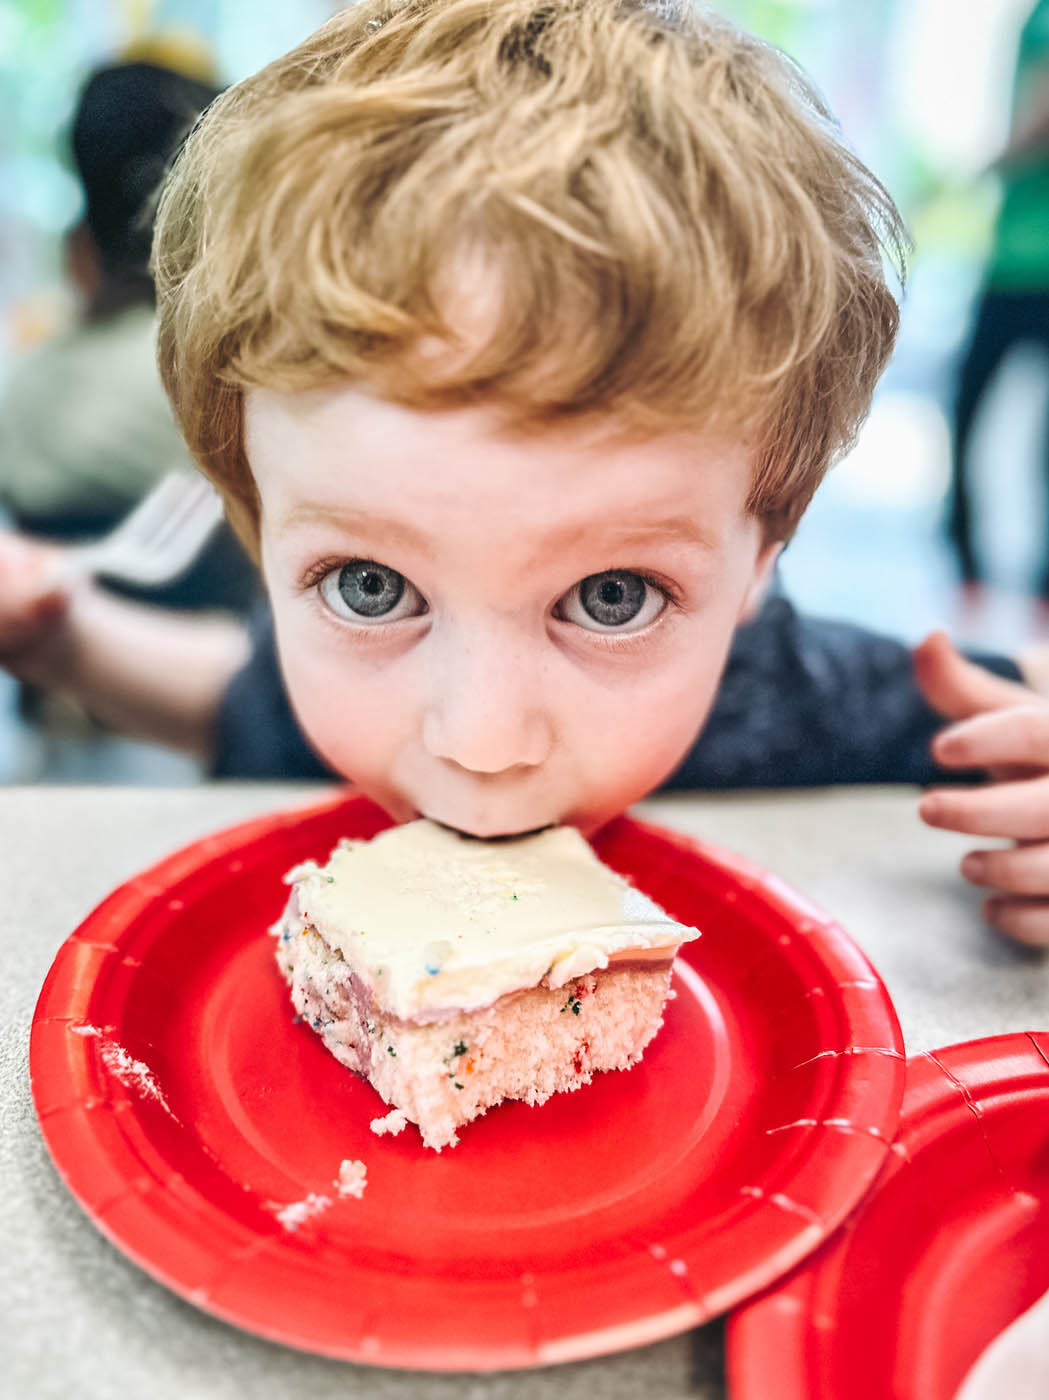 A kid taking a big bite out of a cake piece at Romp n' Roll - a children's party place in St. Petersburg, FL.